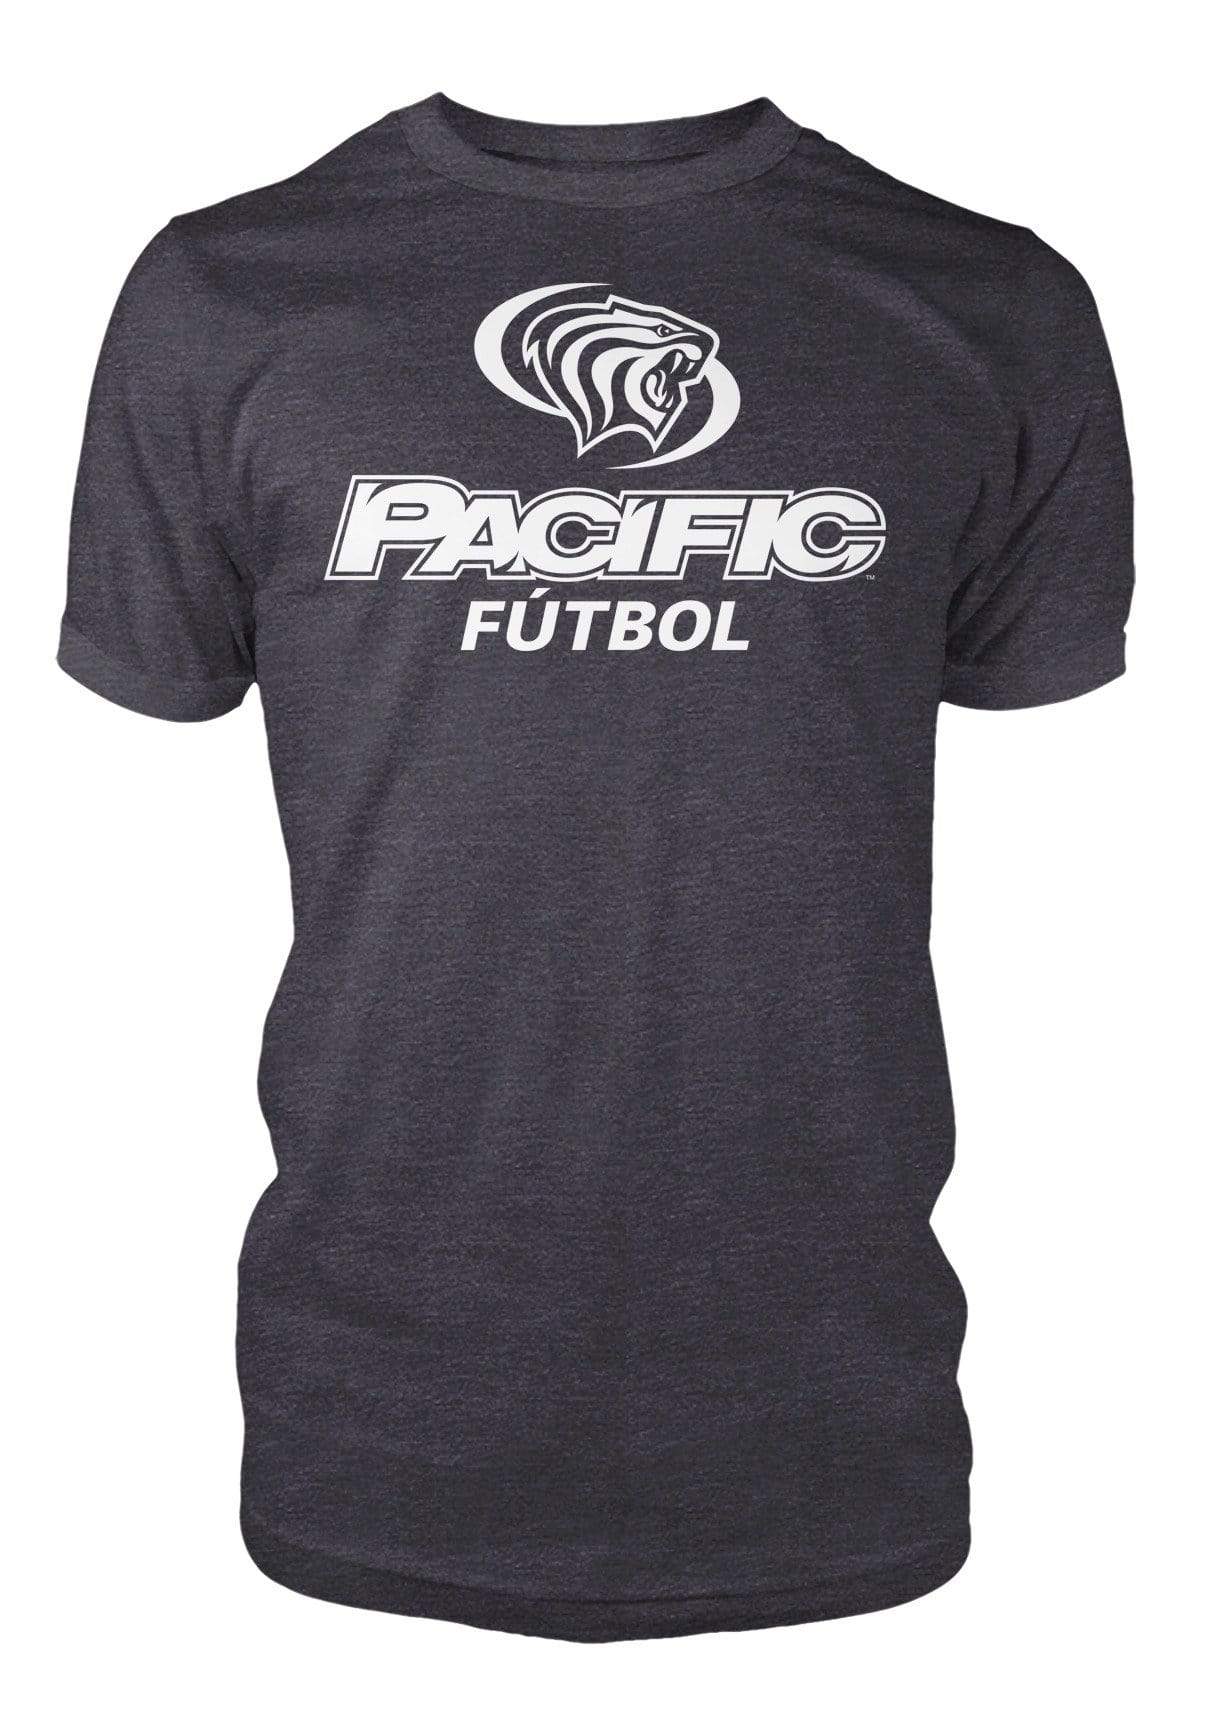 University of the Pacific Tigers Futbol (Soccer) Division I T-shirt by Zeus Collegiate